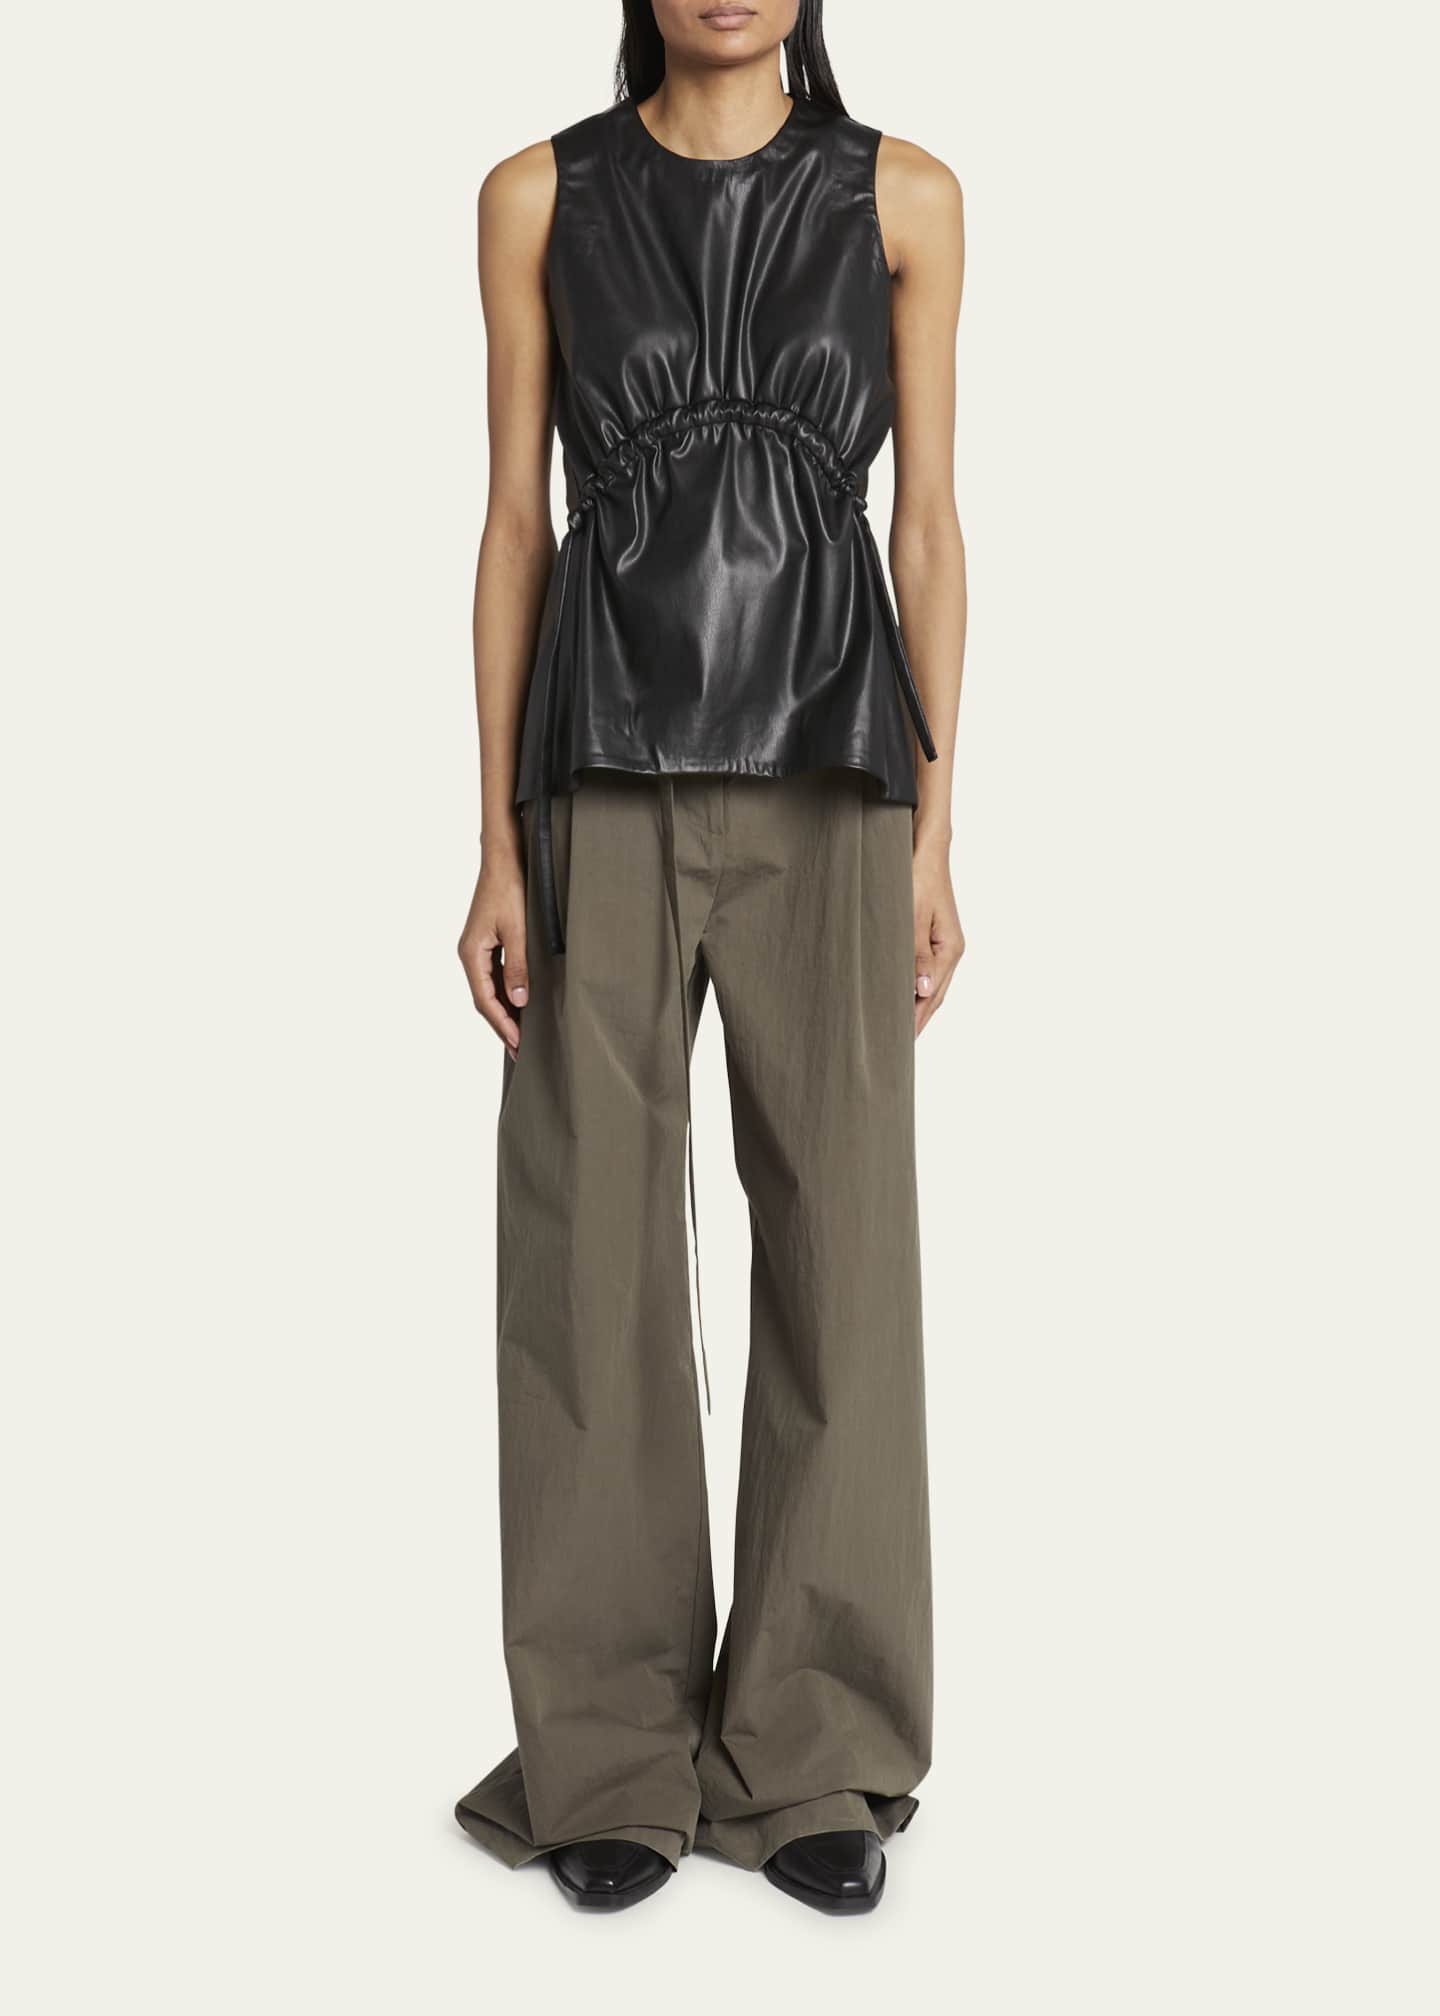 Proenza Schouler White Label Faux-Leather Sleeveless Drawstring Top ...